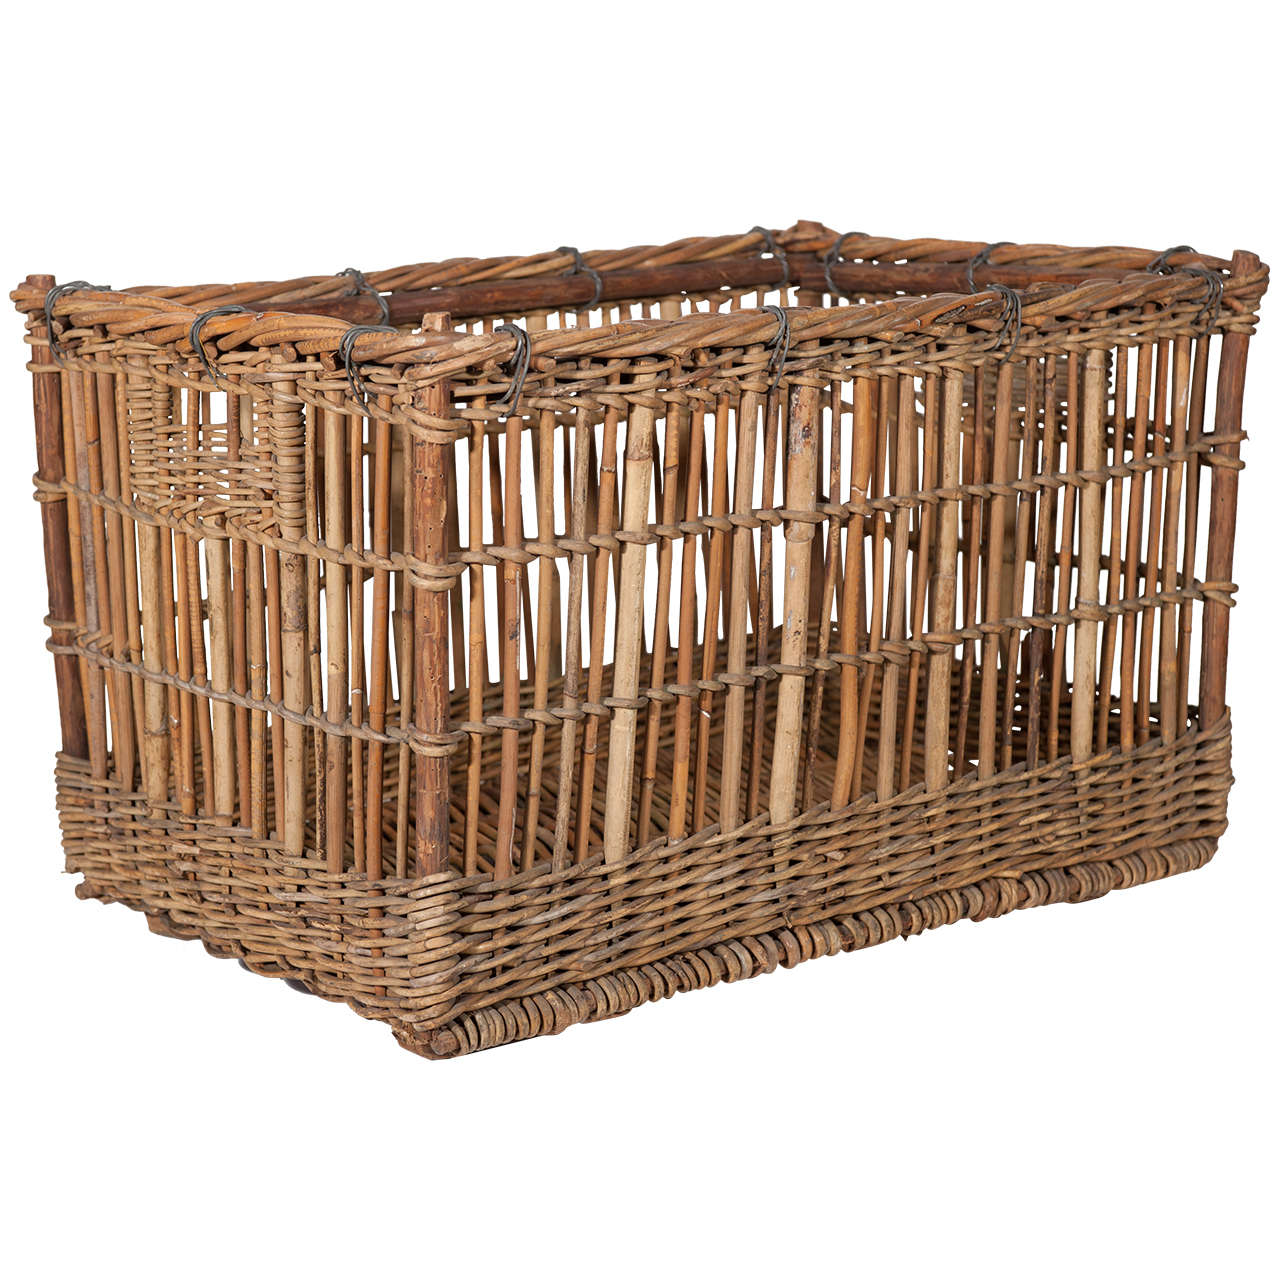 19th century Rustic Wicker Basket with Wooden Footing, c. 1890 France For Sale